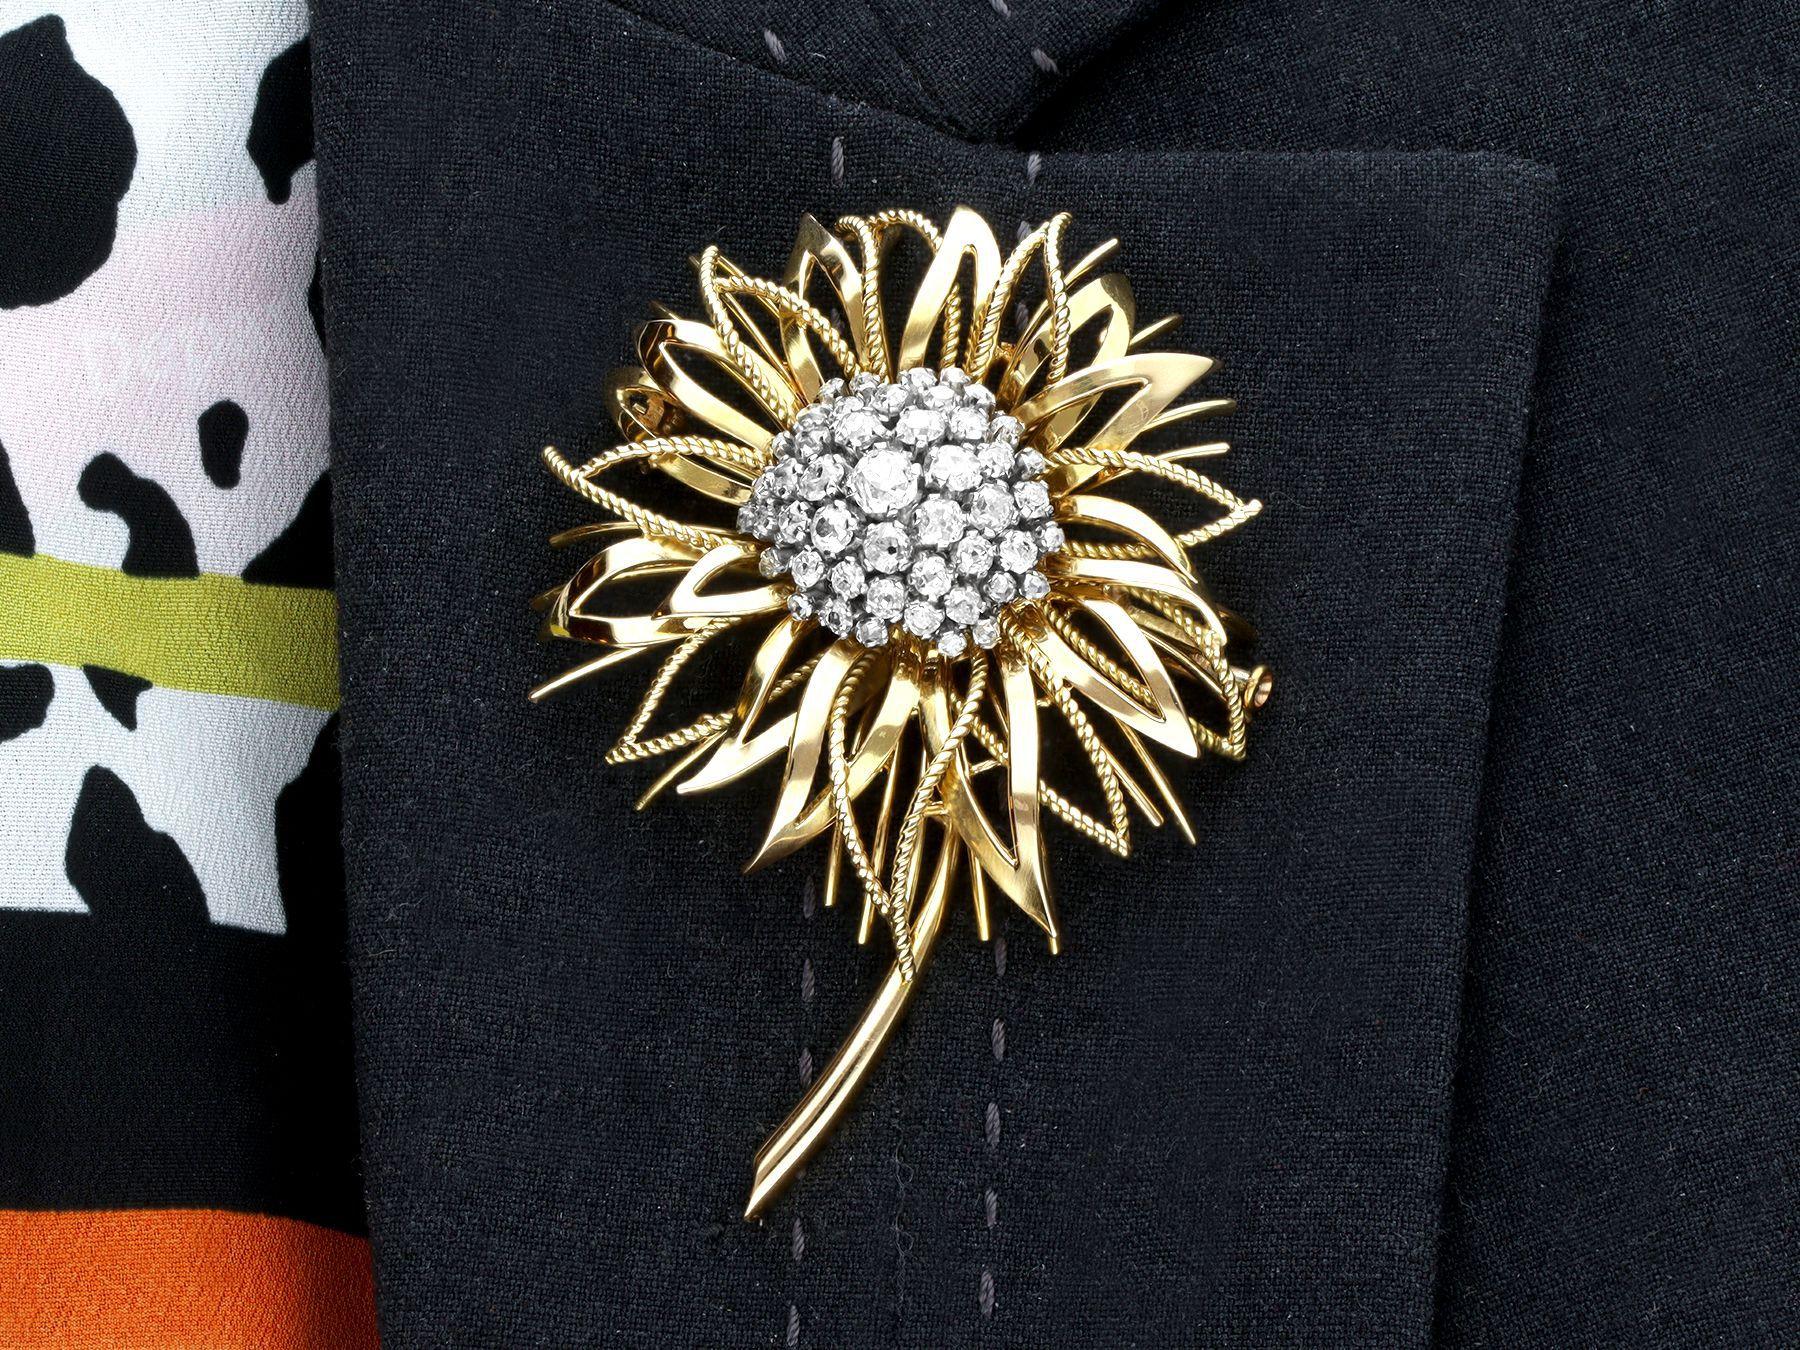 Vintage French 2.89 Carat Diamond and Yellow Gold Flower Brooch, circa 1950 For Sale 5